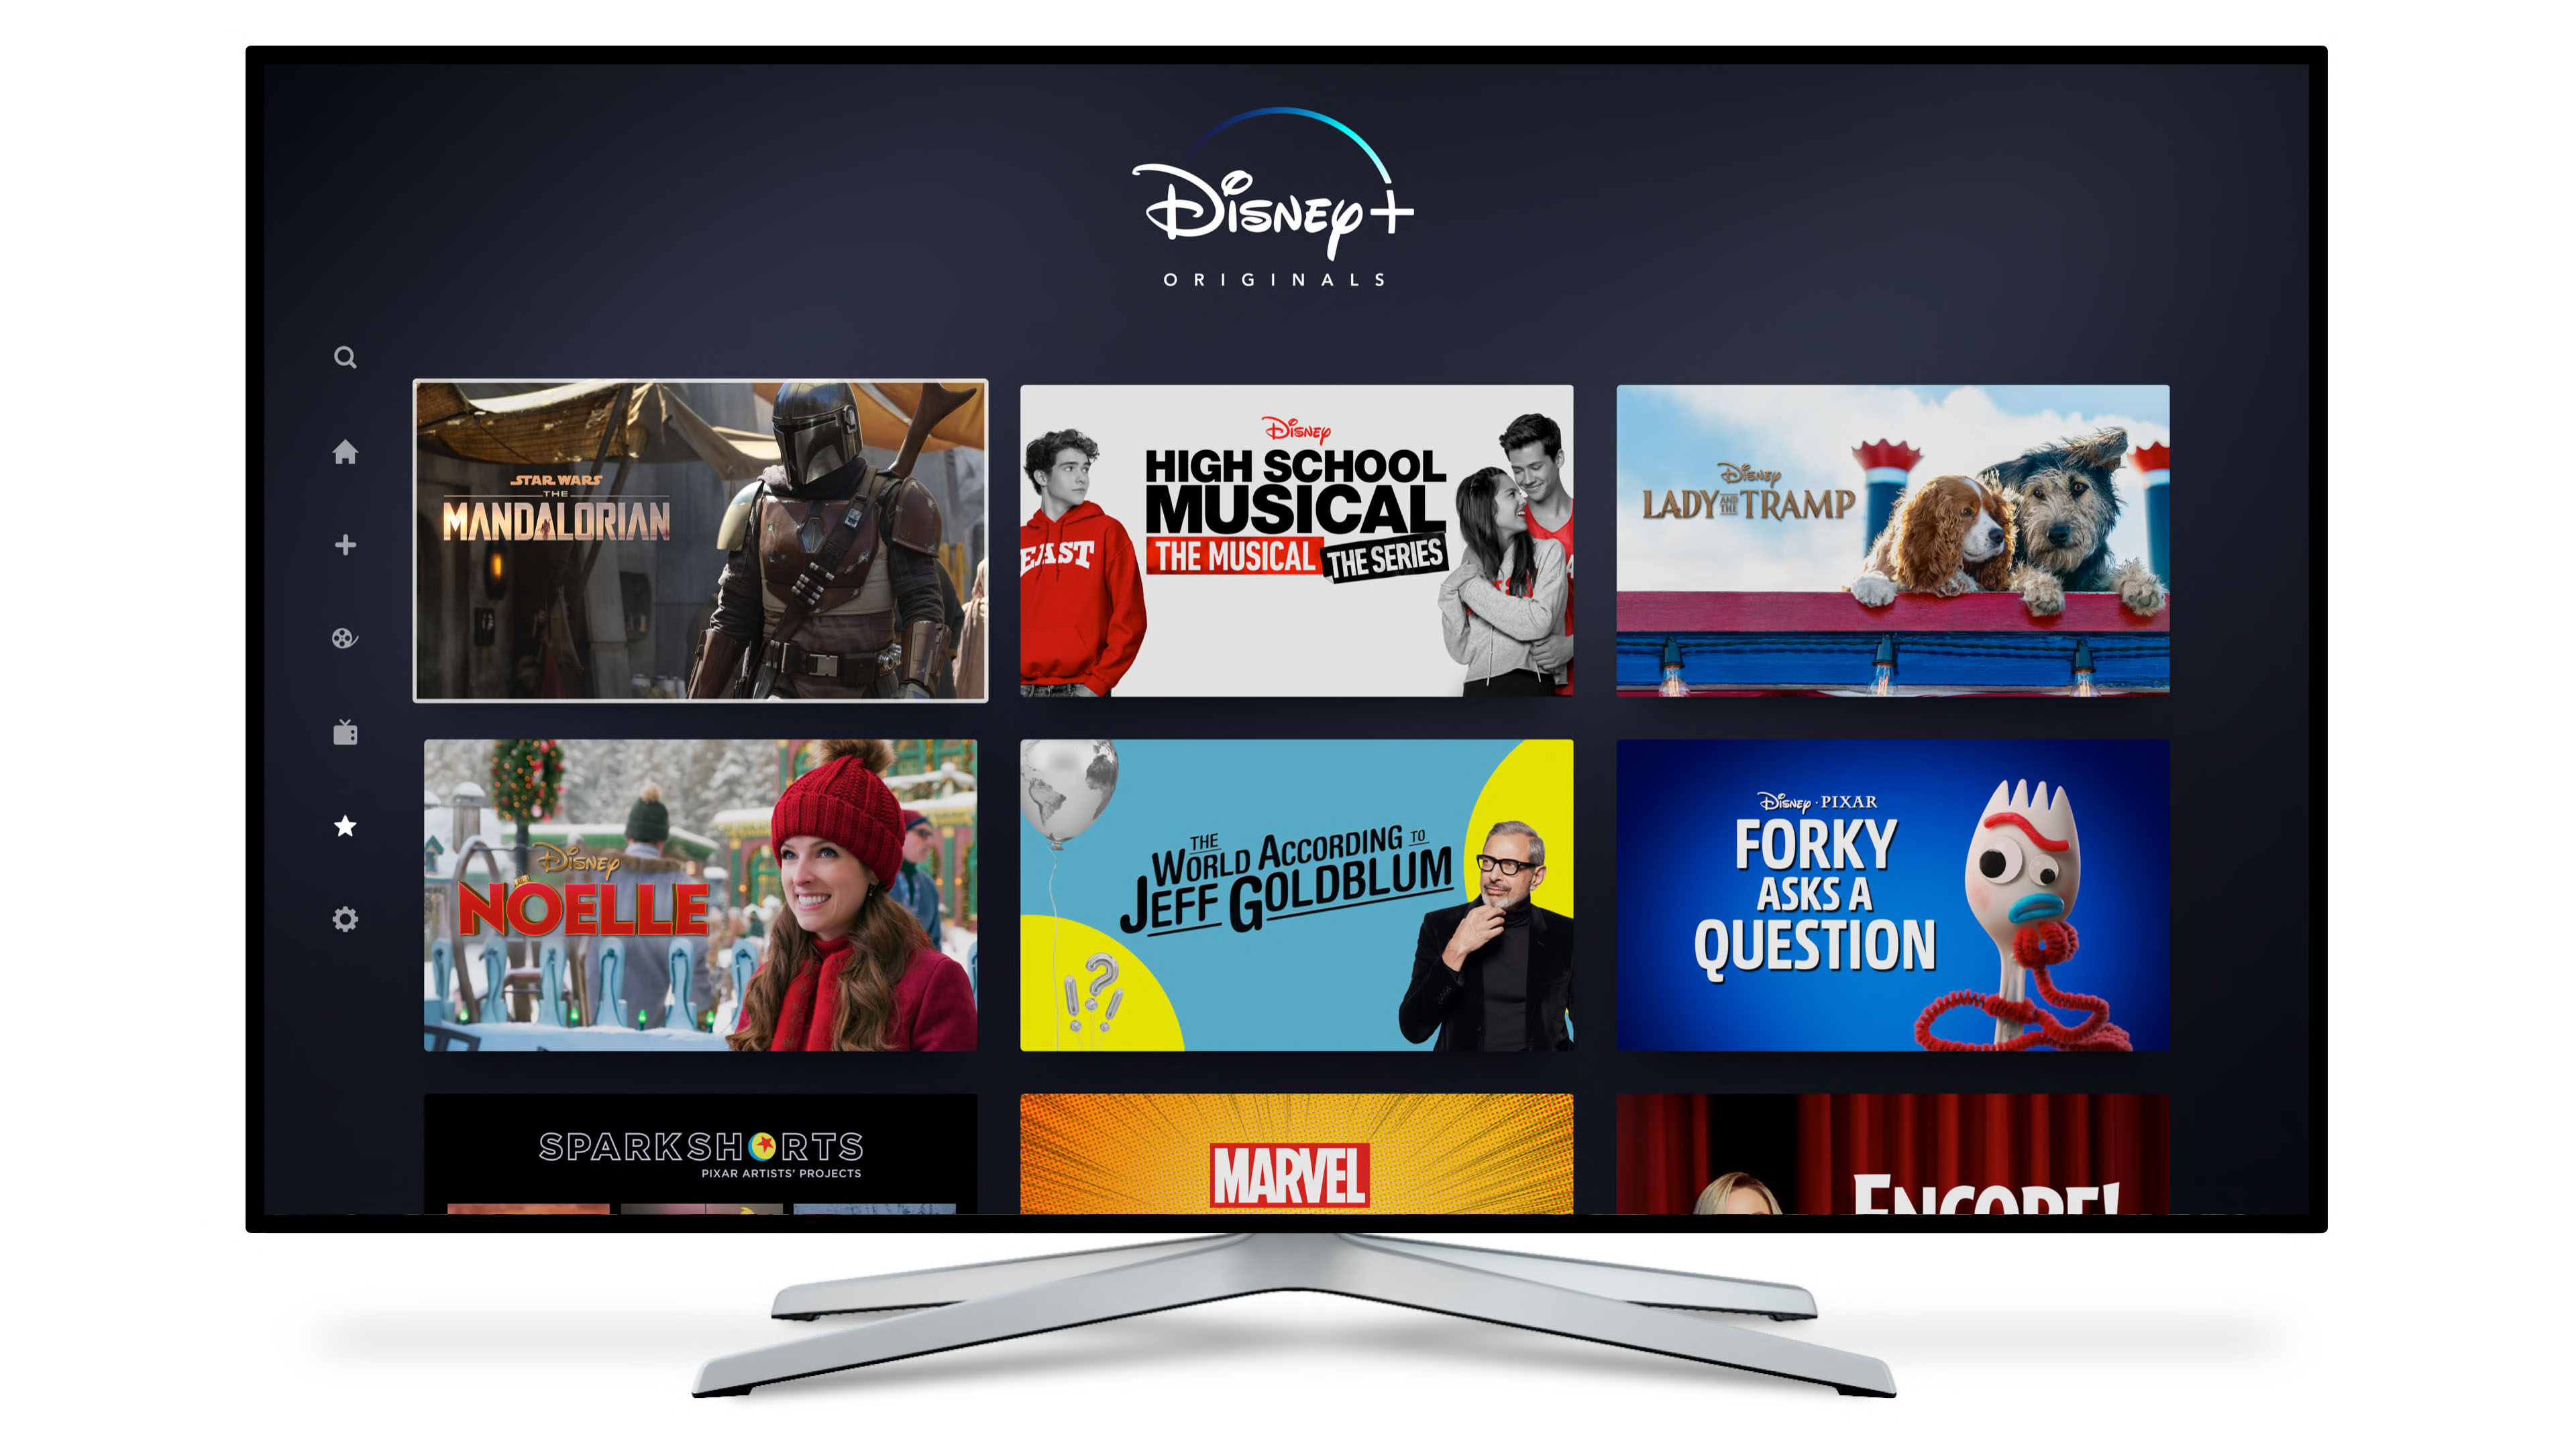 Disney S Streaming Services Disney Espn Hulu Ranked In Top 5 Here S How To Bundle Them Al Com